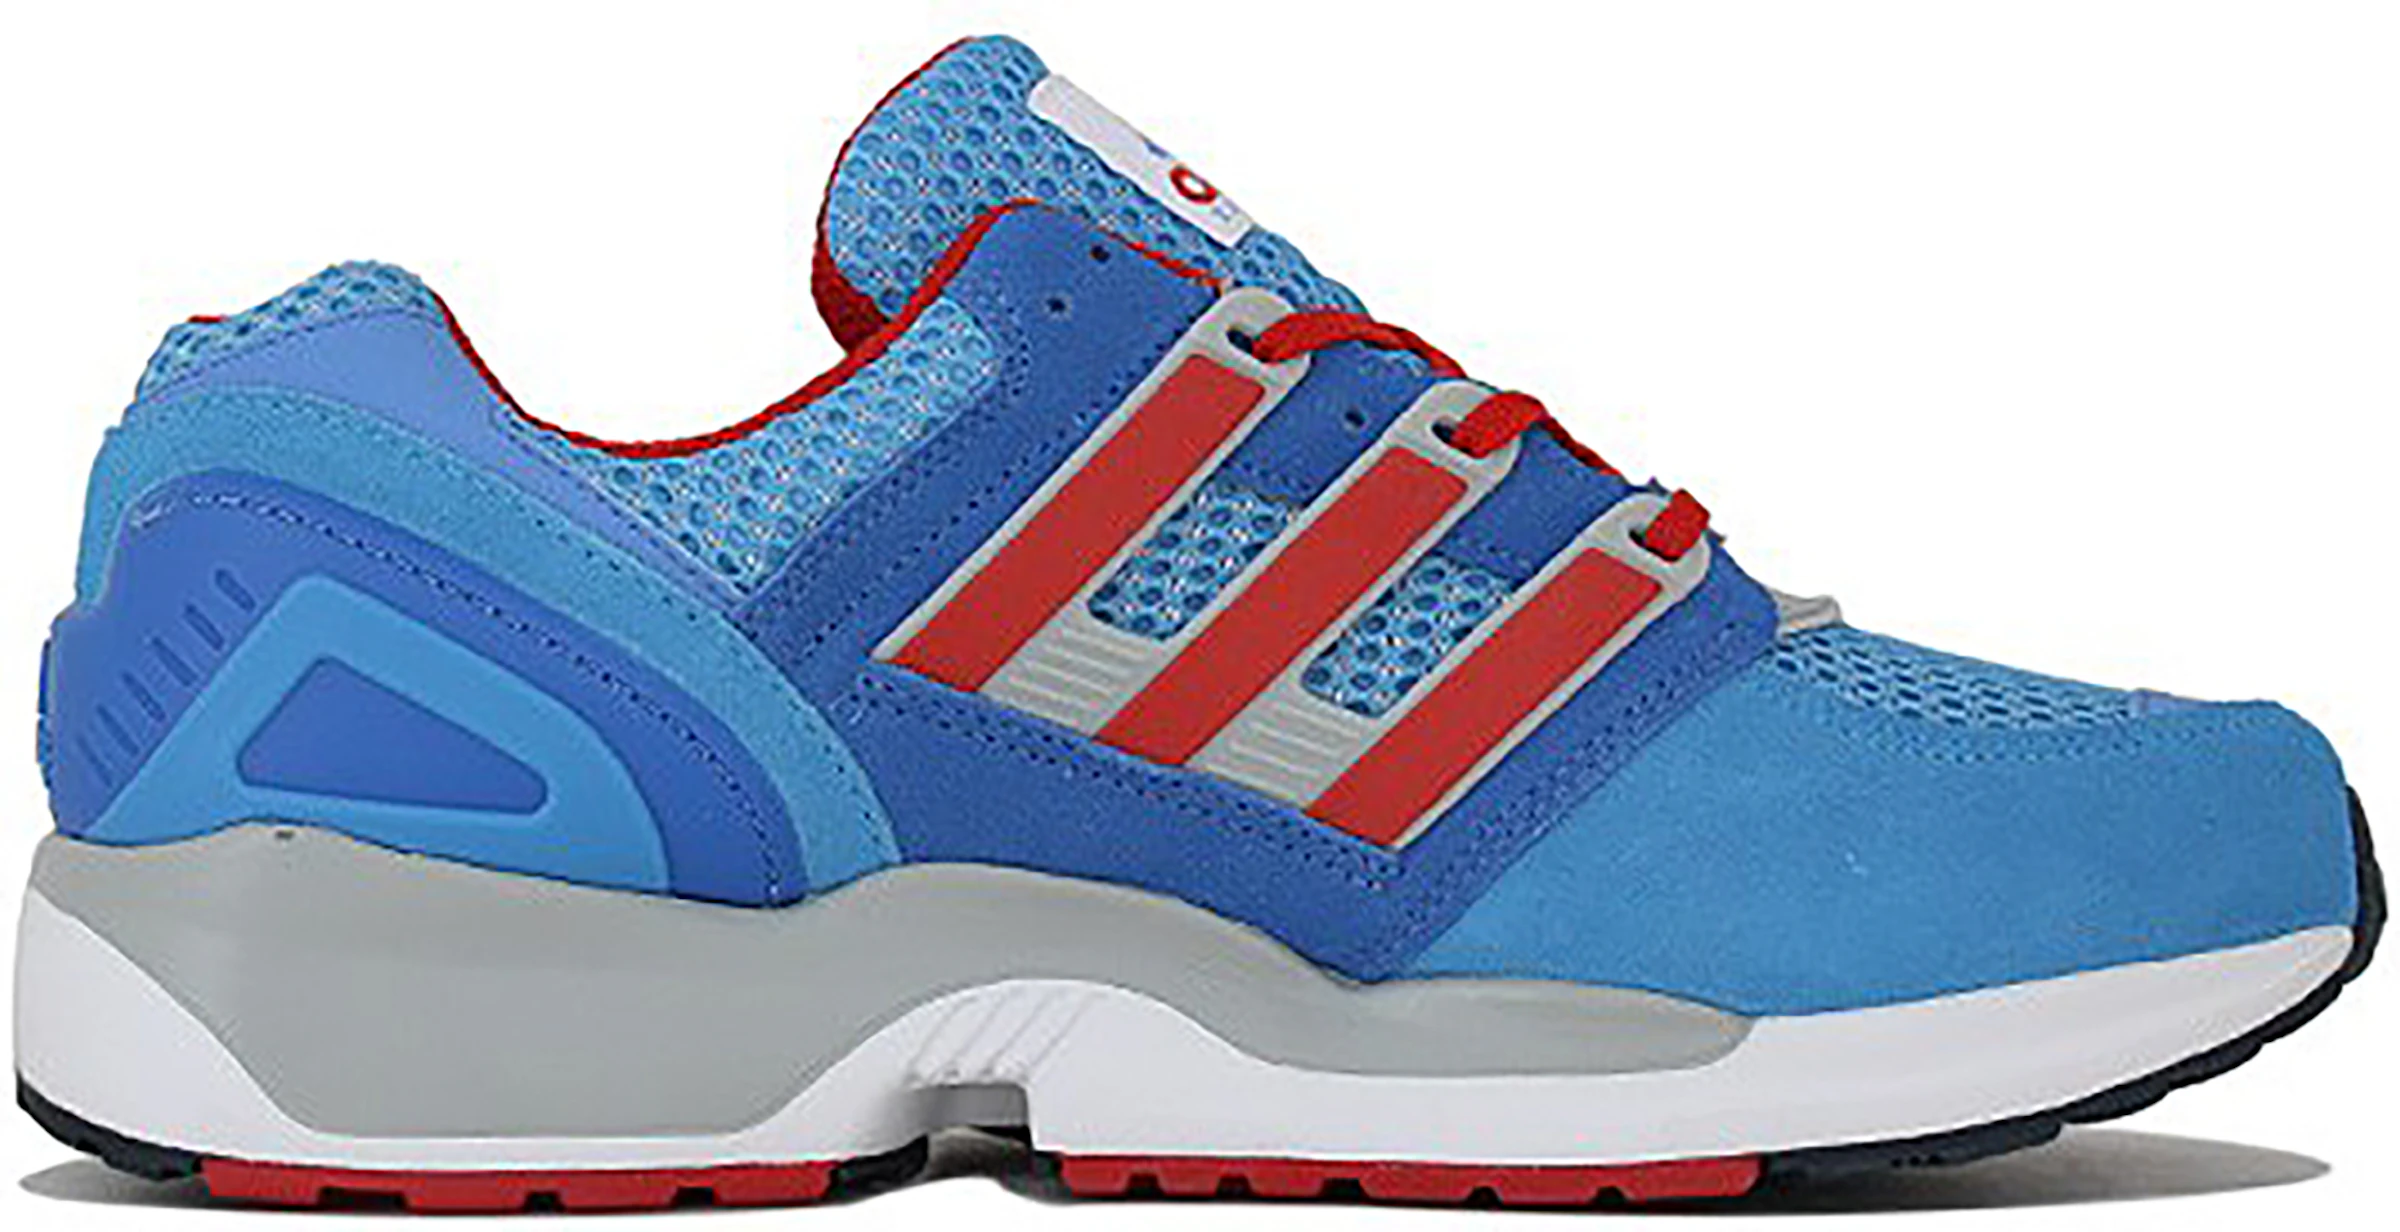 adidas EQT Support Primeknit Blue Red - G44215 -